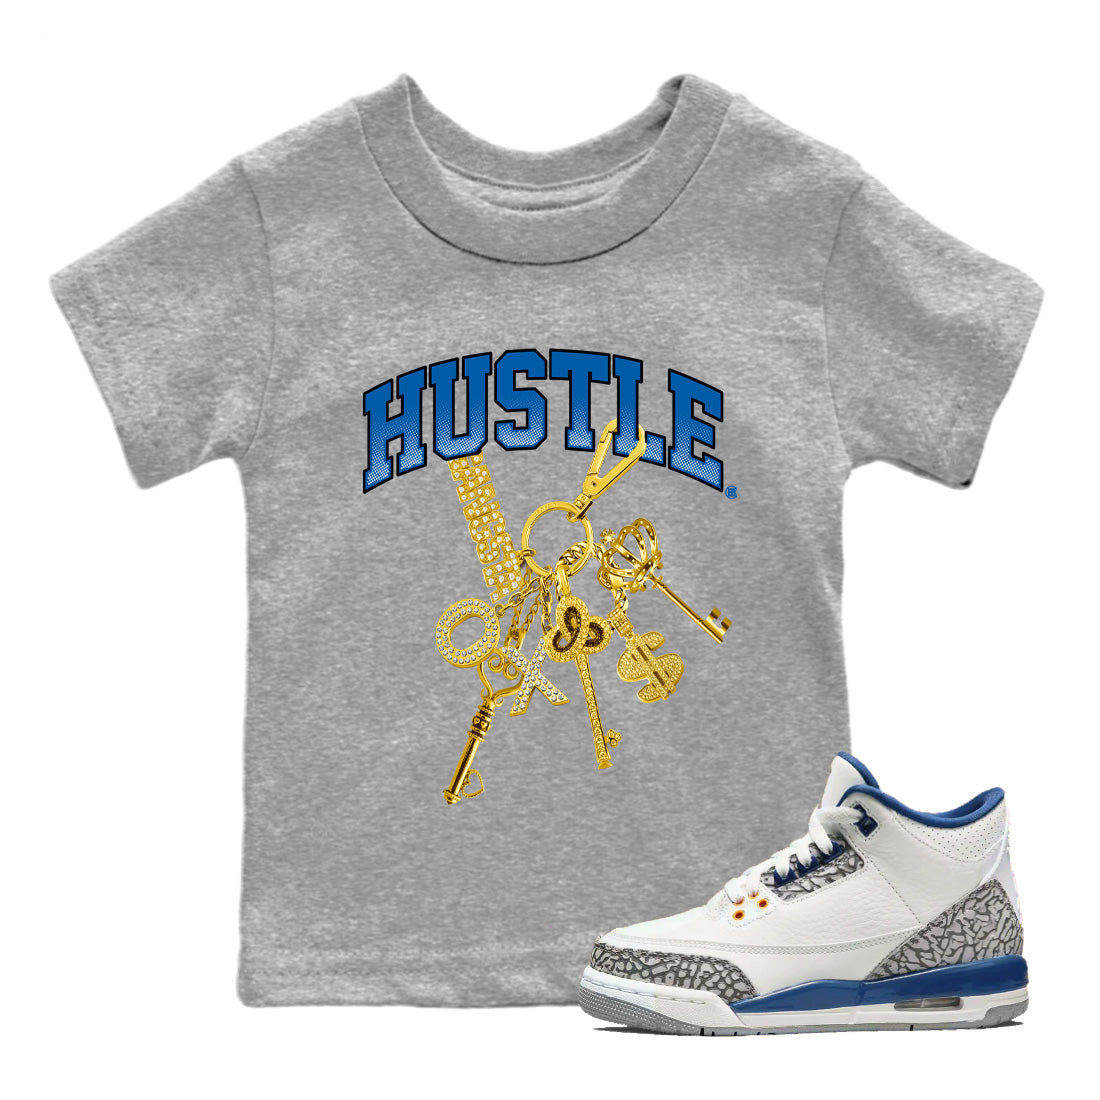 Air Jordan 3 Wizards Gold Hustle Baby and Kids Sneaker Tees Air Jordan 3 Wizards Kids Sneaker Tees Size Chart